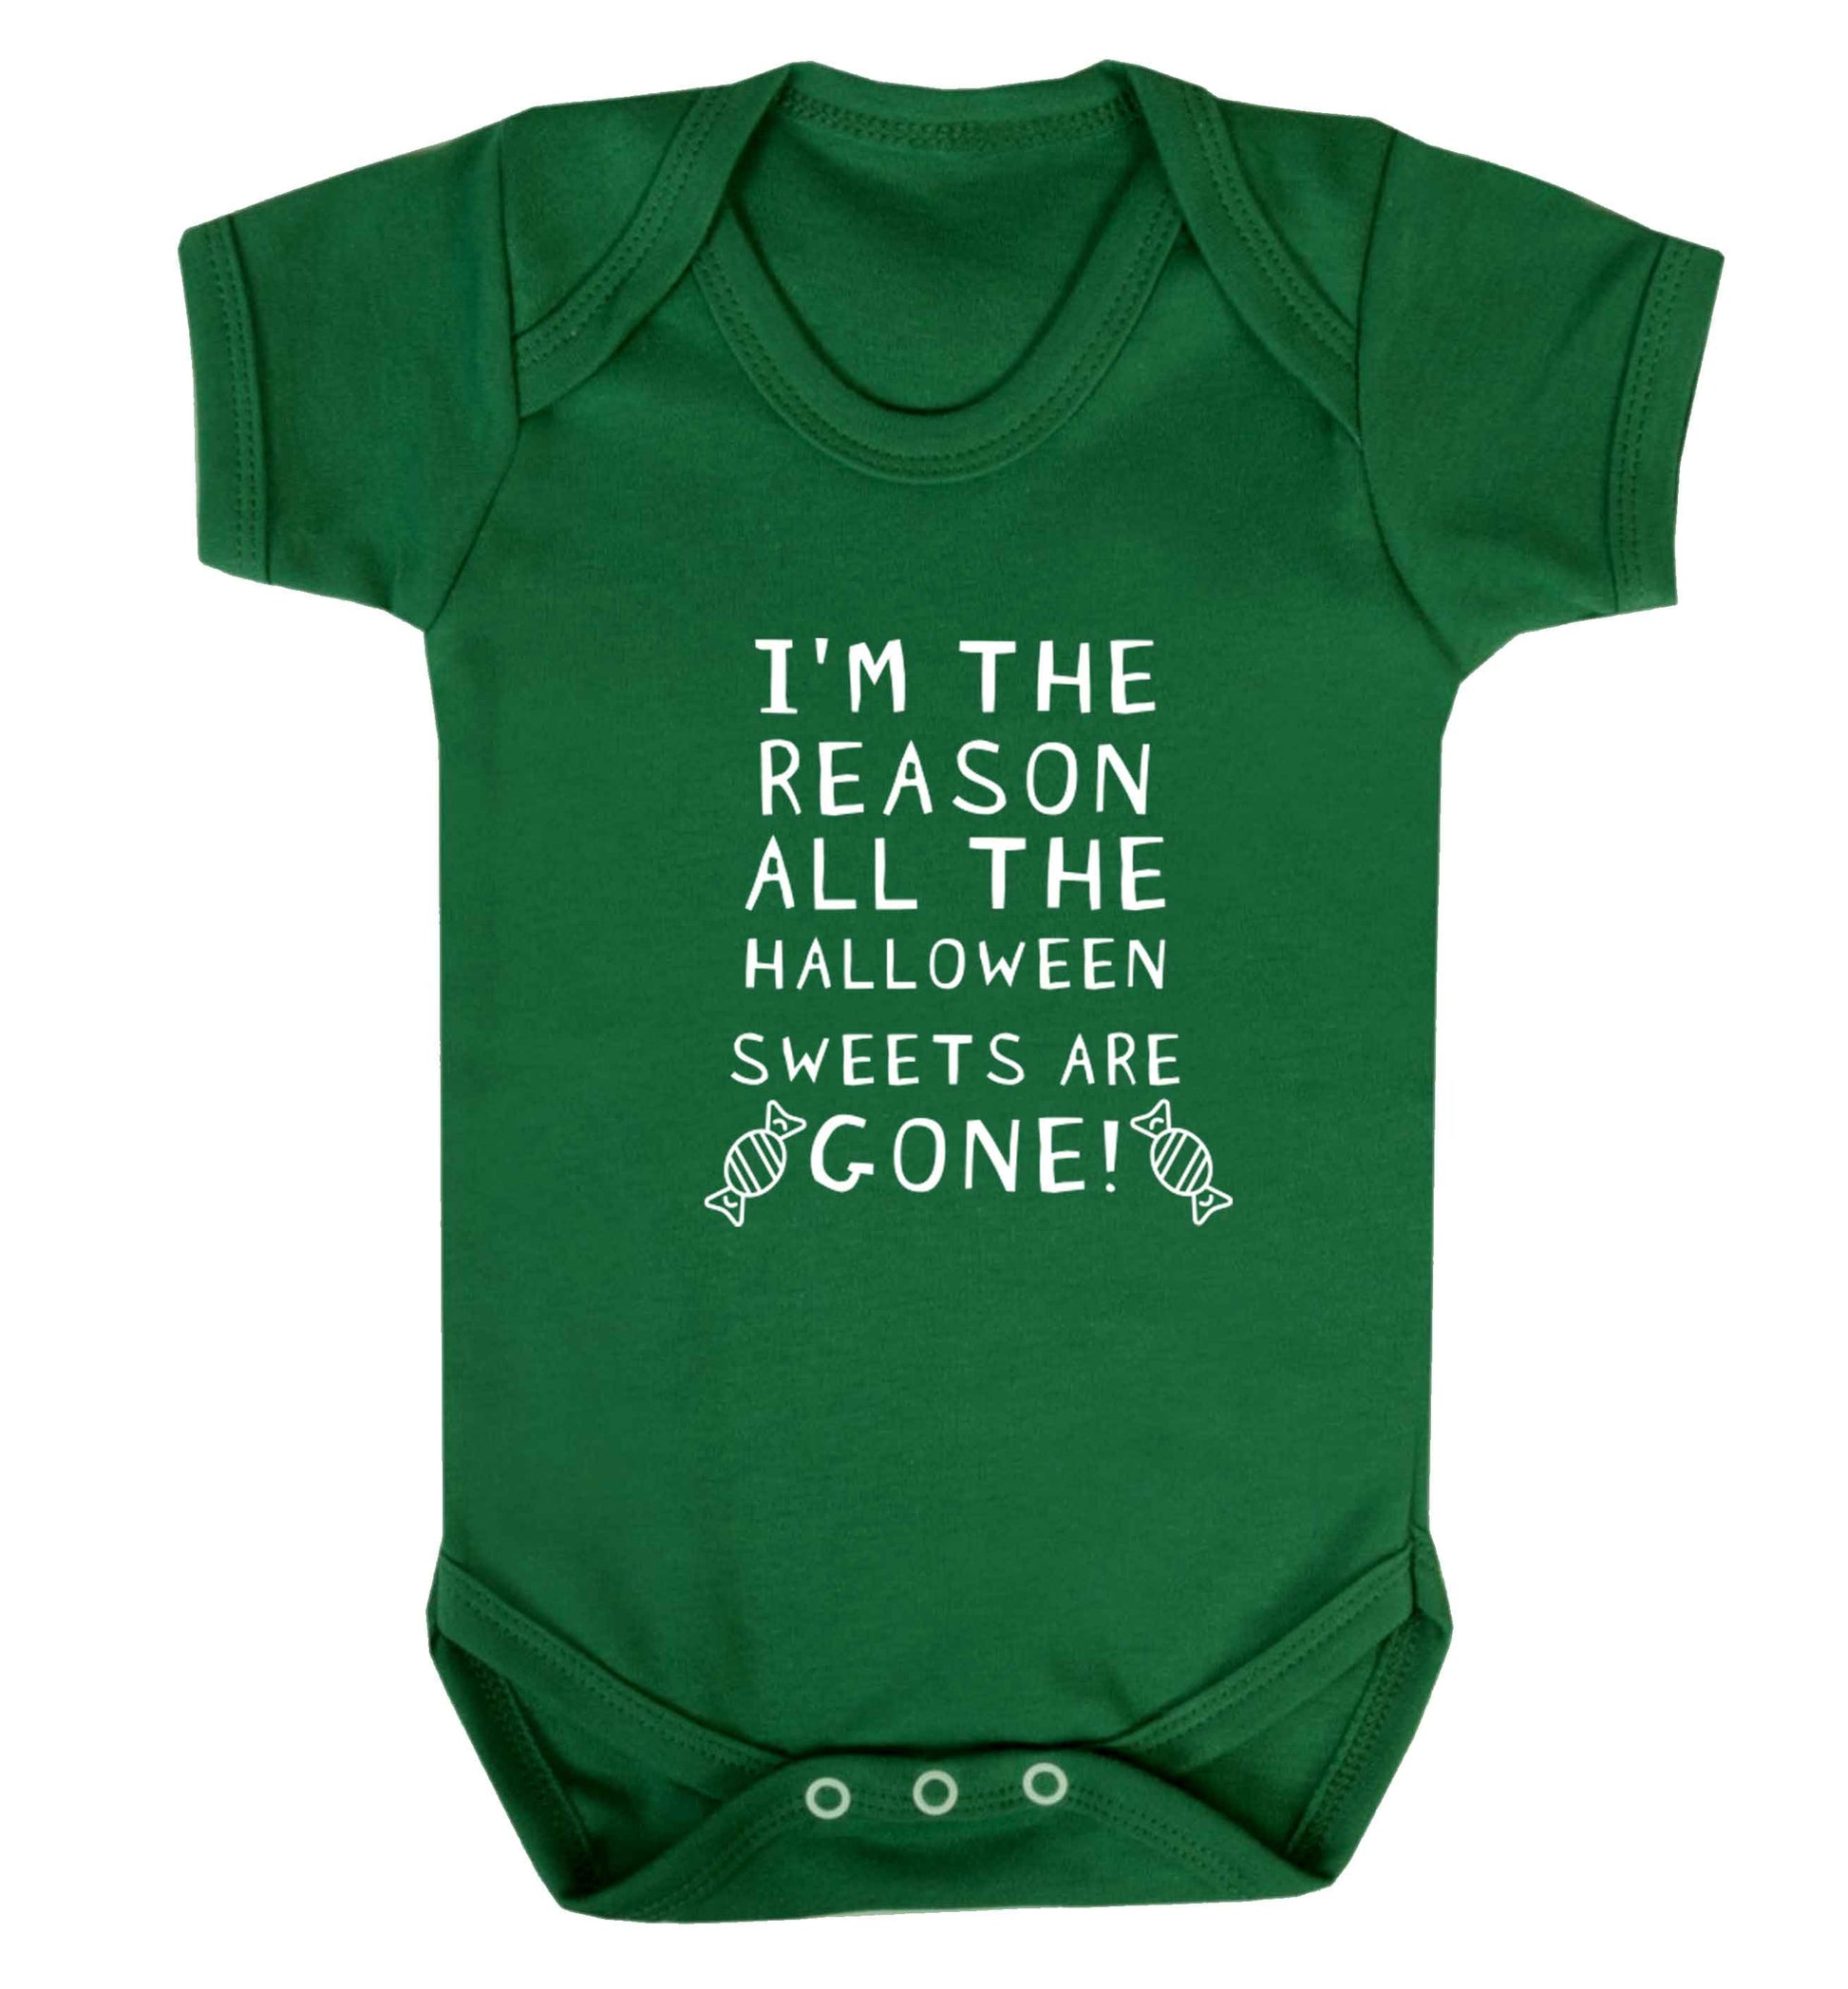 I'm the reason all of the halloween sweets are gone baby vest green 18-24 months